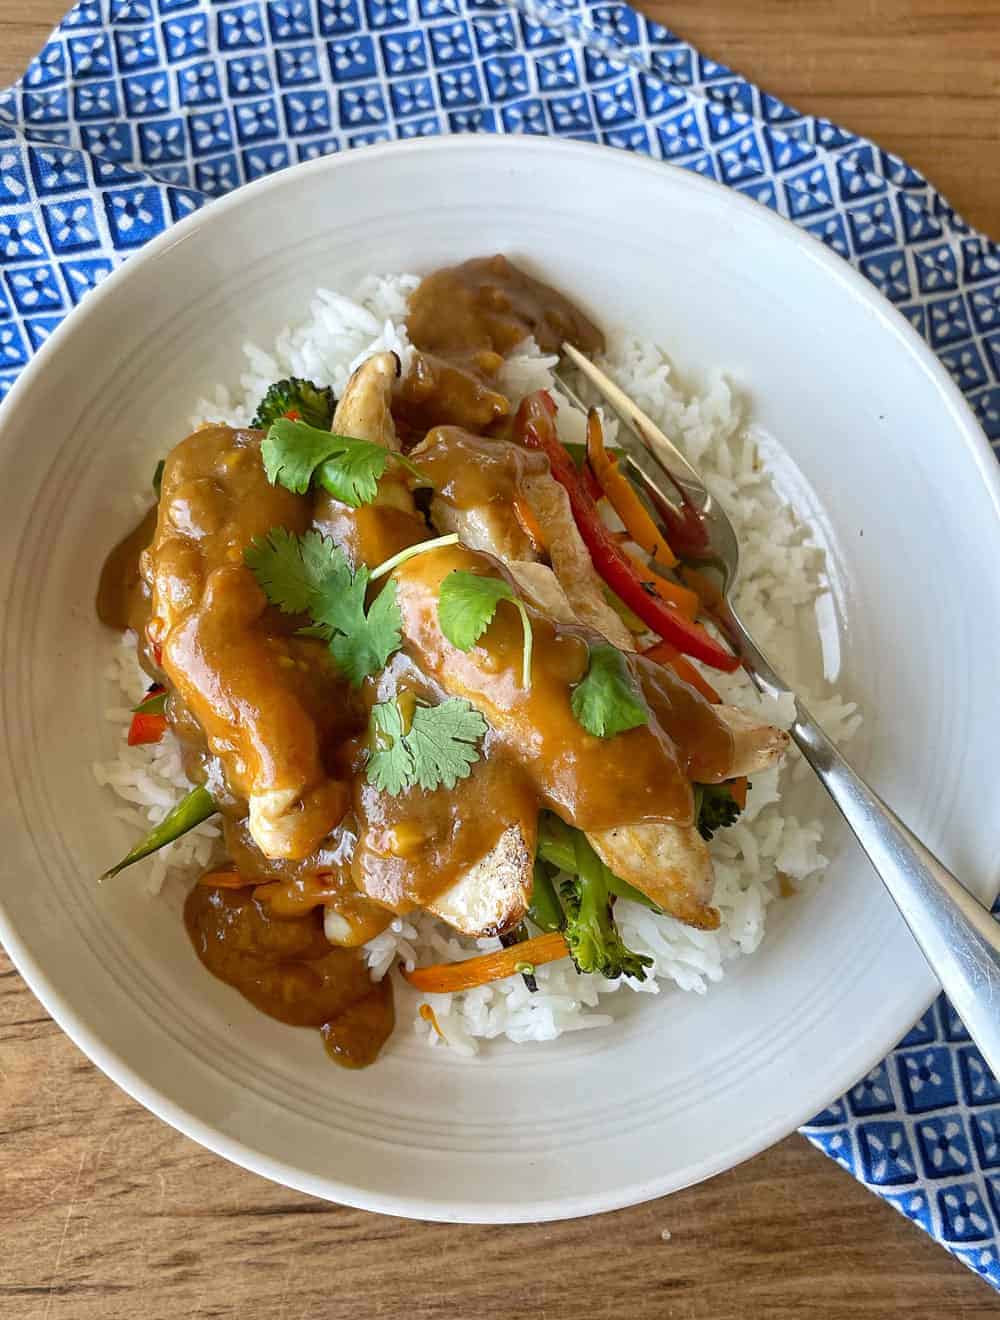 Chicken and vegetable stir fry with creamy satay sauce